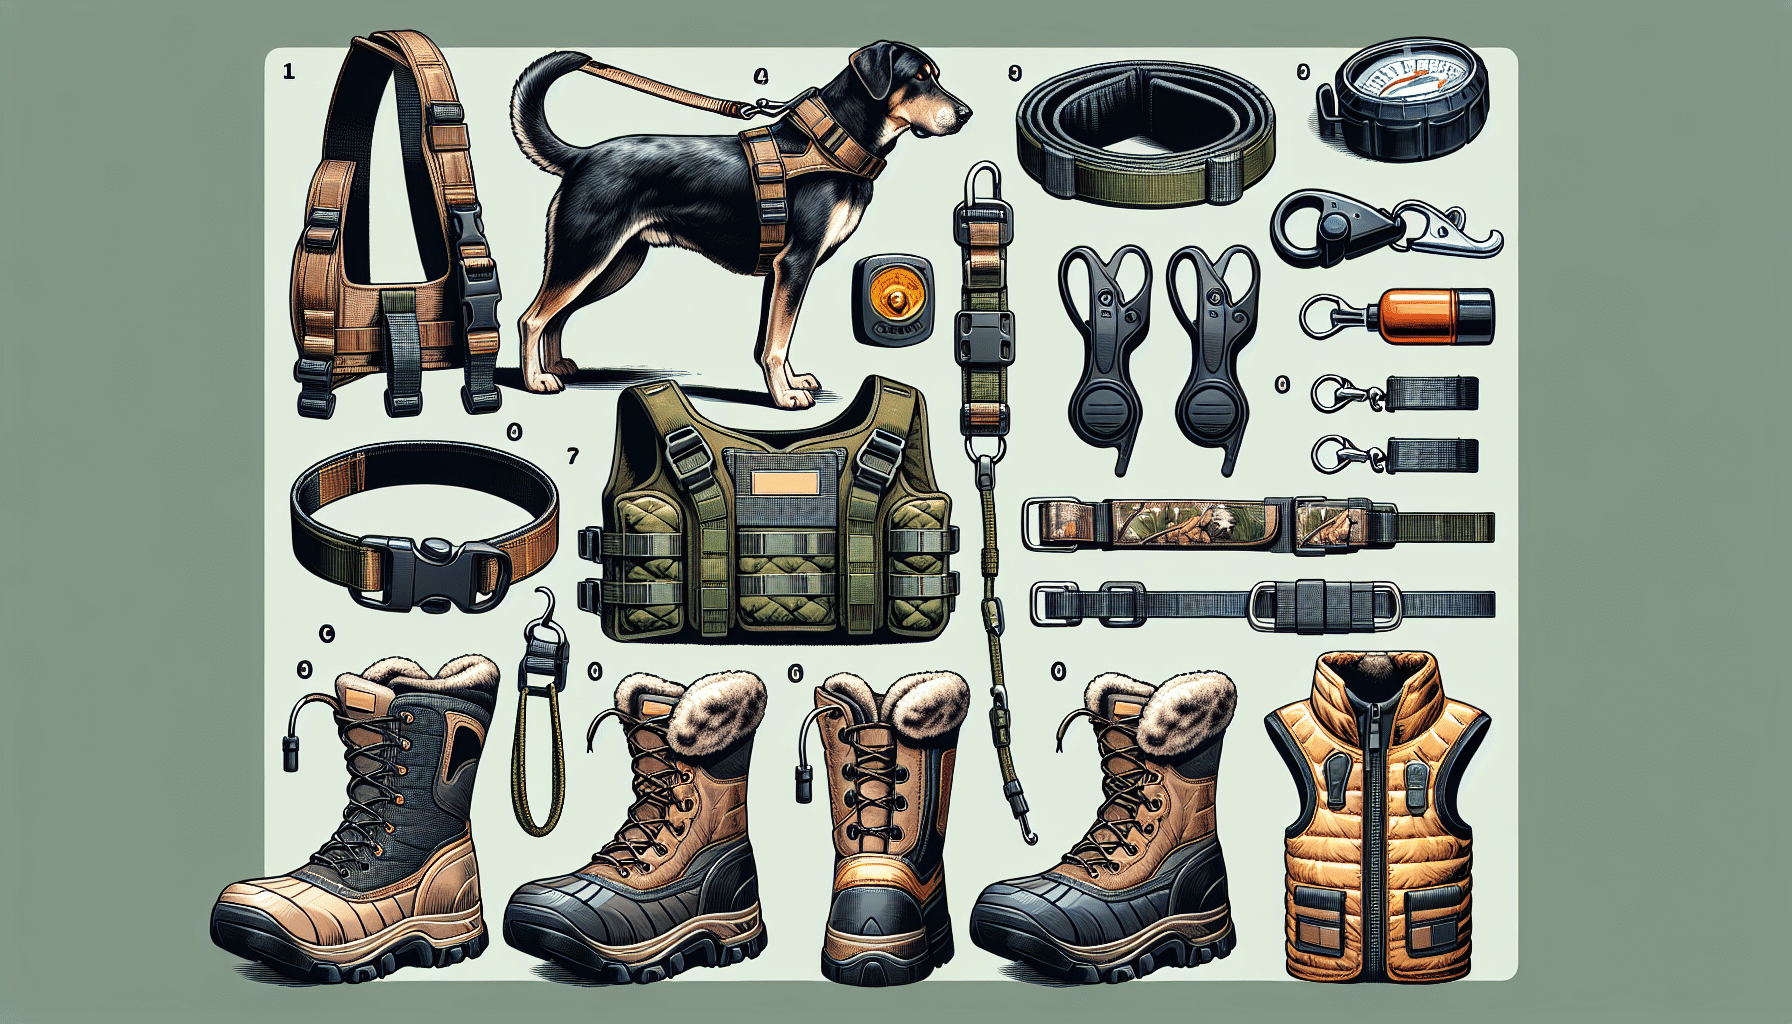 Generate an image showcasing a variety of unidentified hunting dog equipment suitable for the month of April. The image should feature items such as a sturdy leash, a high-quality harness, durable dog boots for rough terrains, lightweight vests for protection and warmth, and training whistles. There should also be a safety reflector and water-resistant items considering the month's weather conditions. Importantly, the image should not contain any humans or text, be it on the items or elsewhere, and no brand names or logos should be visible.